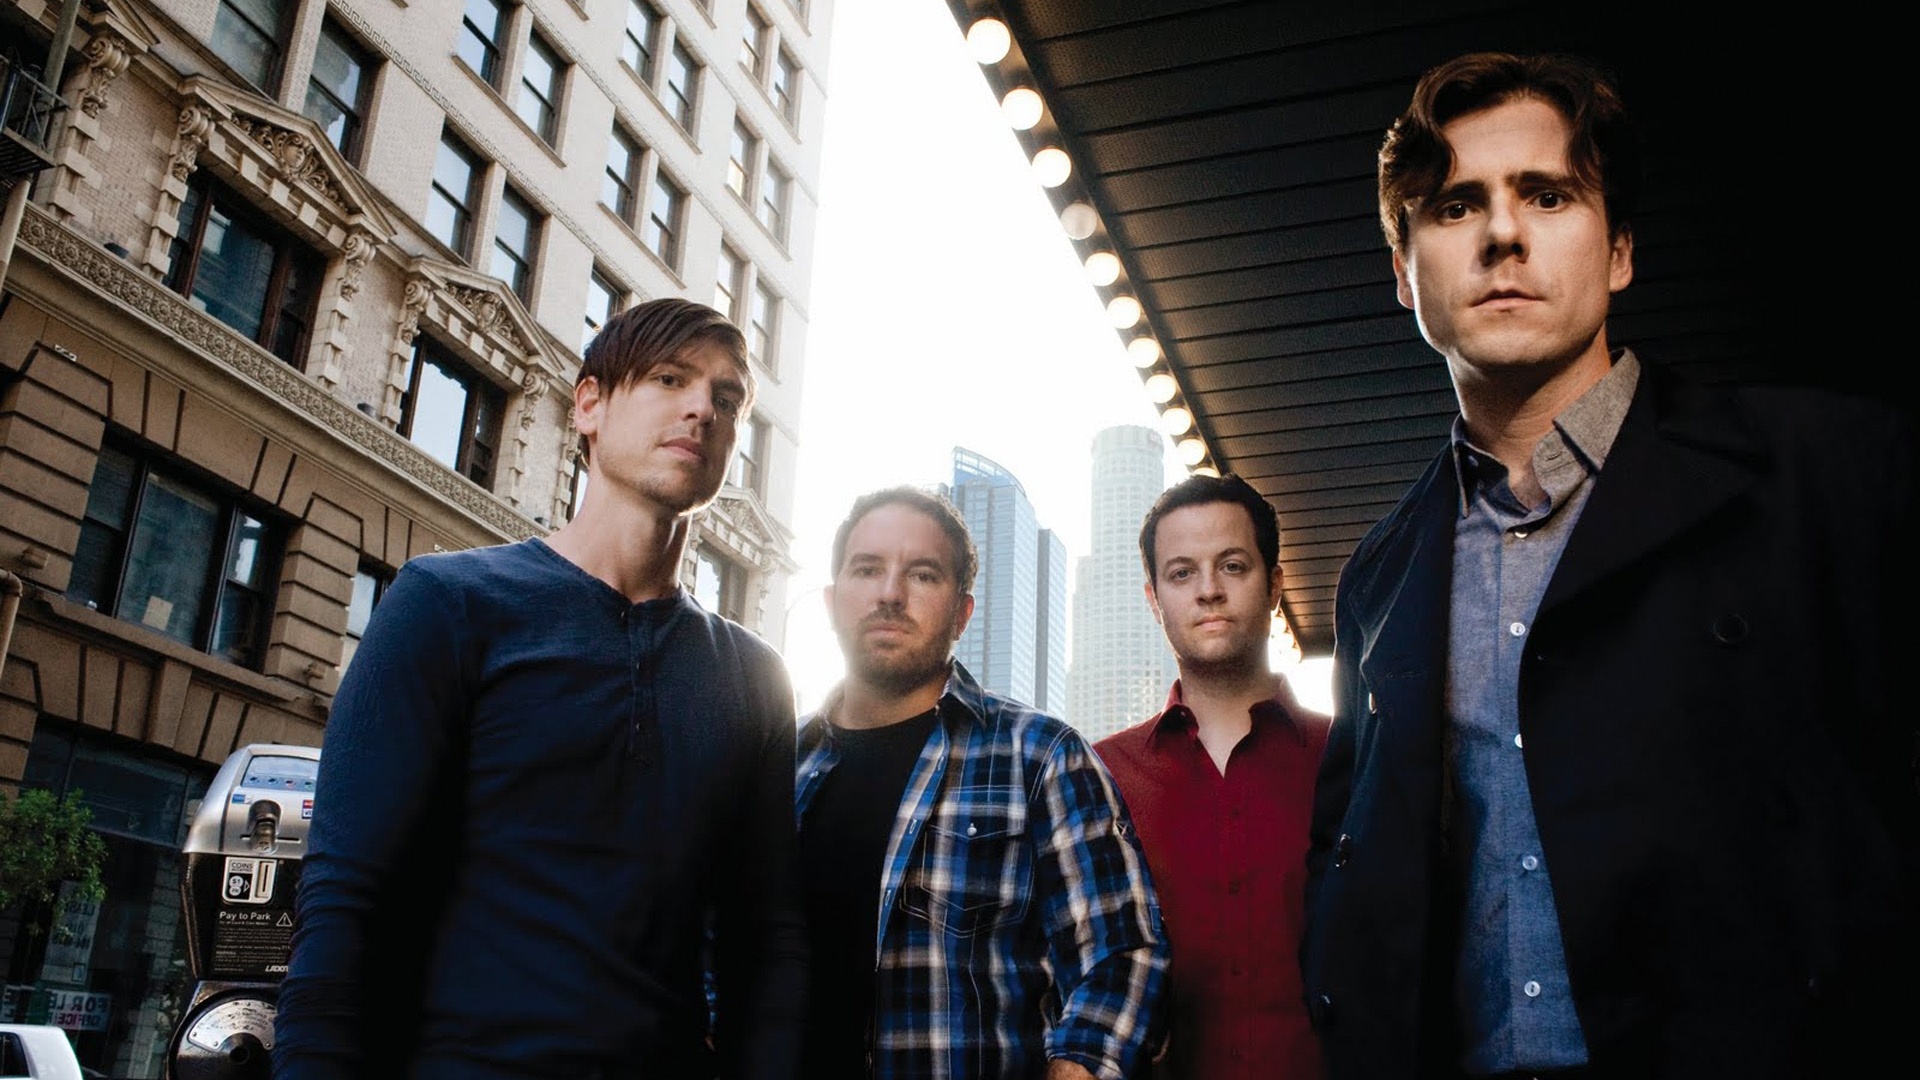 Jimmy Eat World Wallpapers posted by Samantha Anderson 1920x1080